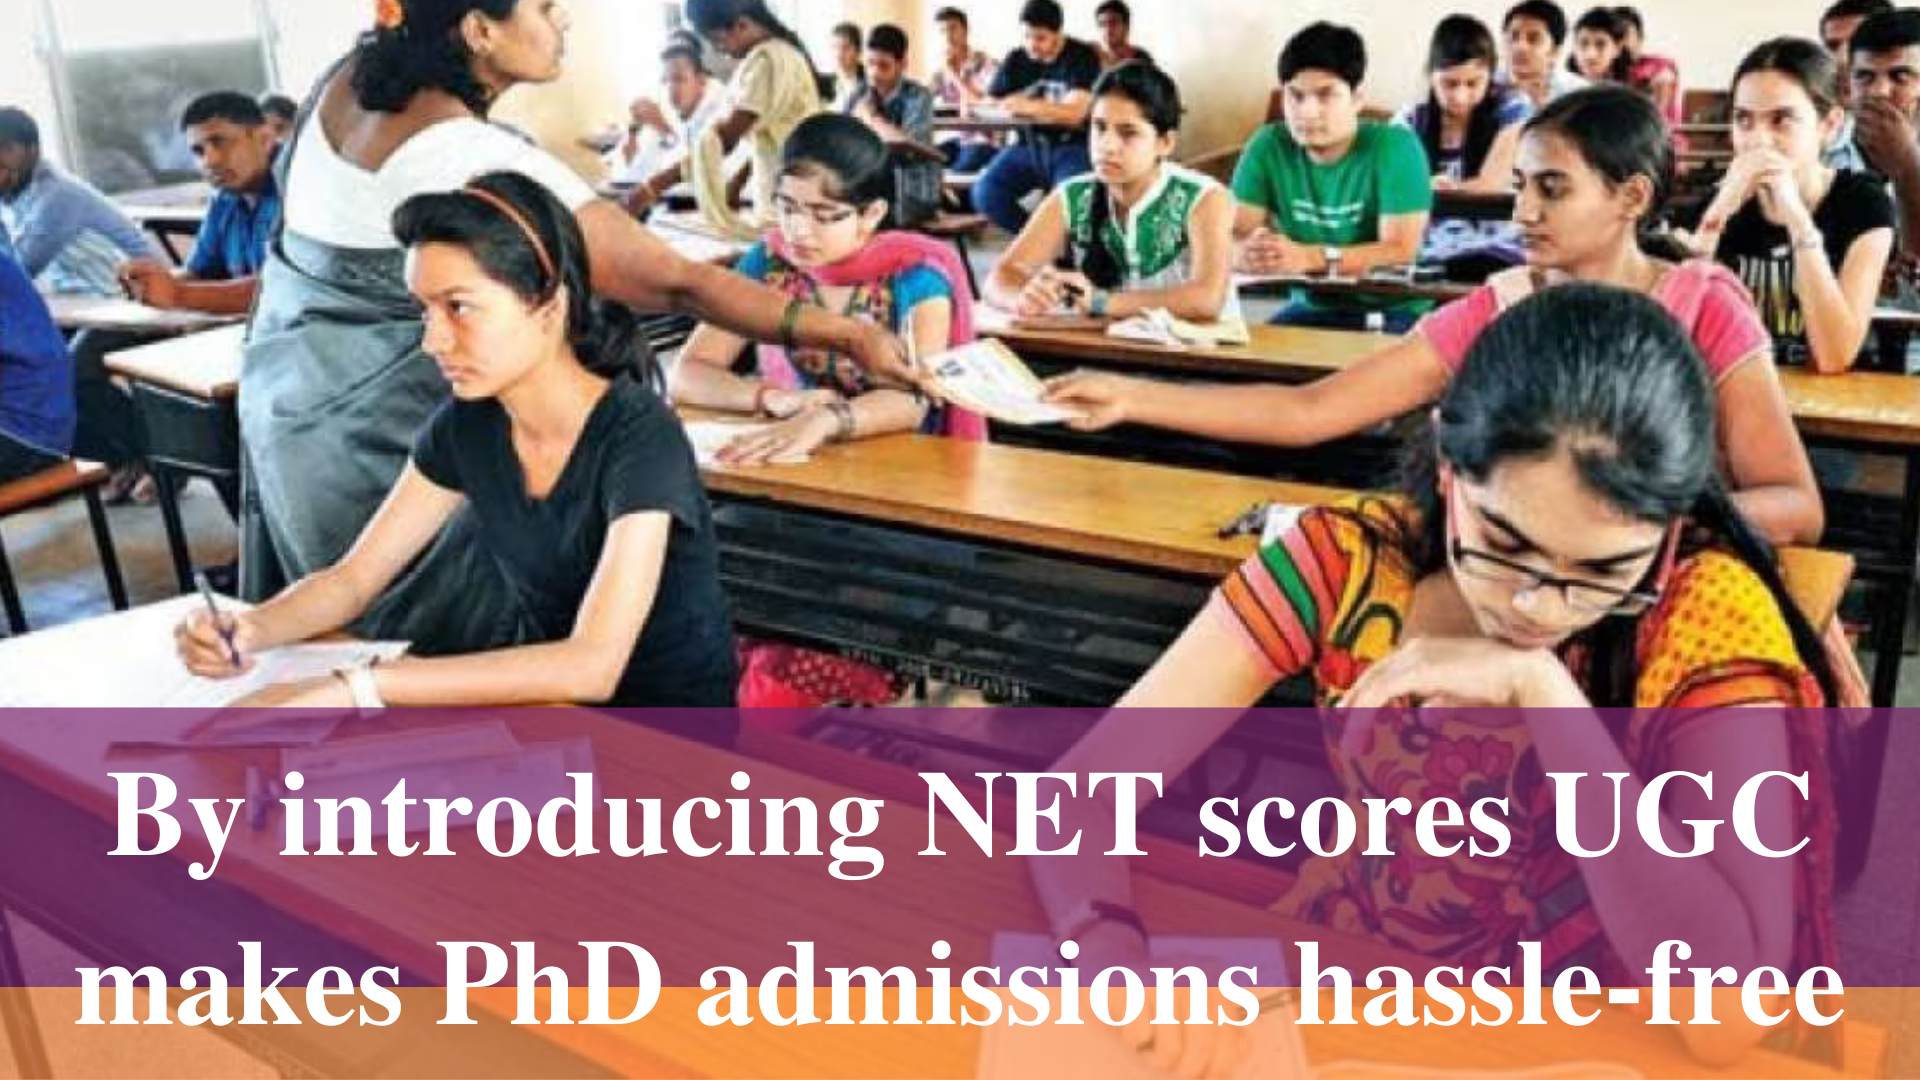 By introducing NET scores UGC makes PhD admissions hassle-free